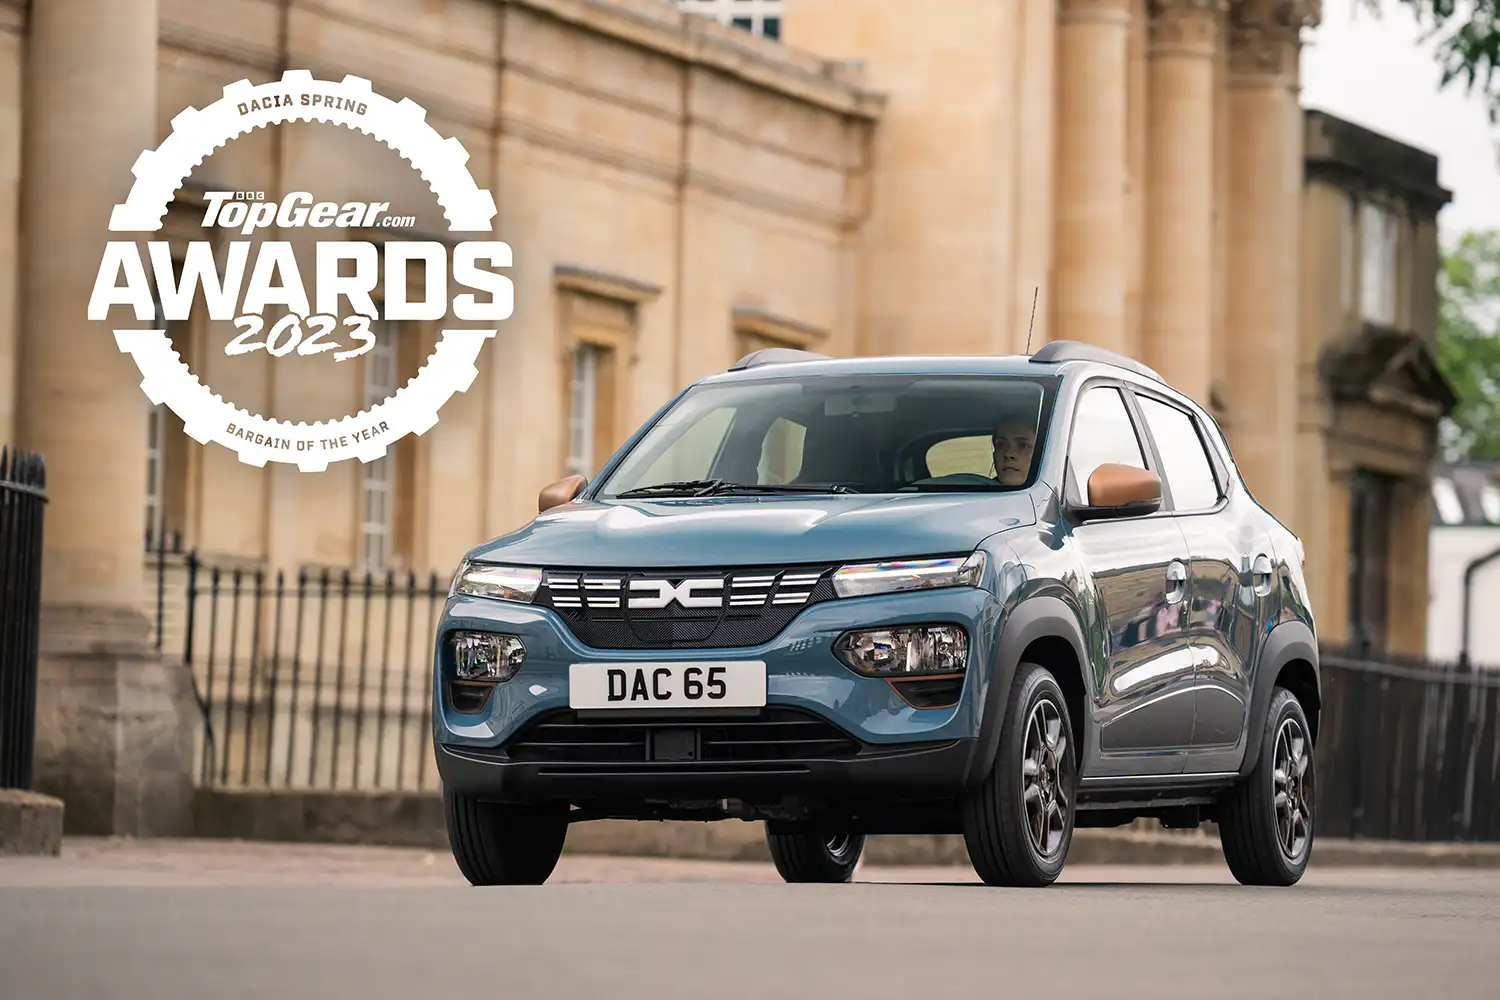 Fully-electric Dacia Spring is Top Gear's 'Bargain of the Year